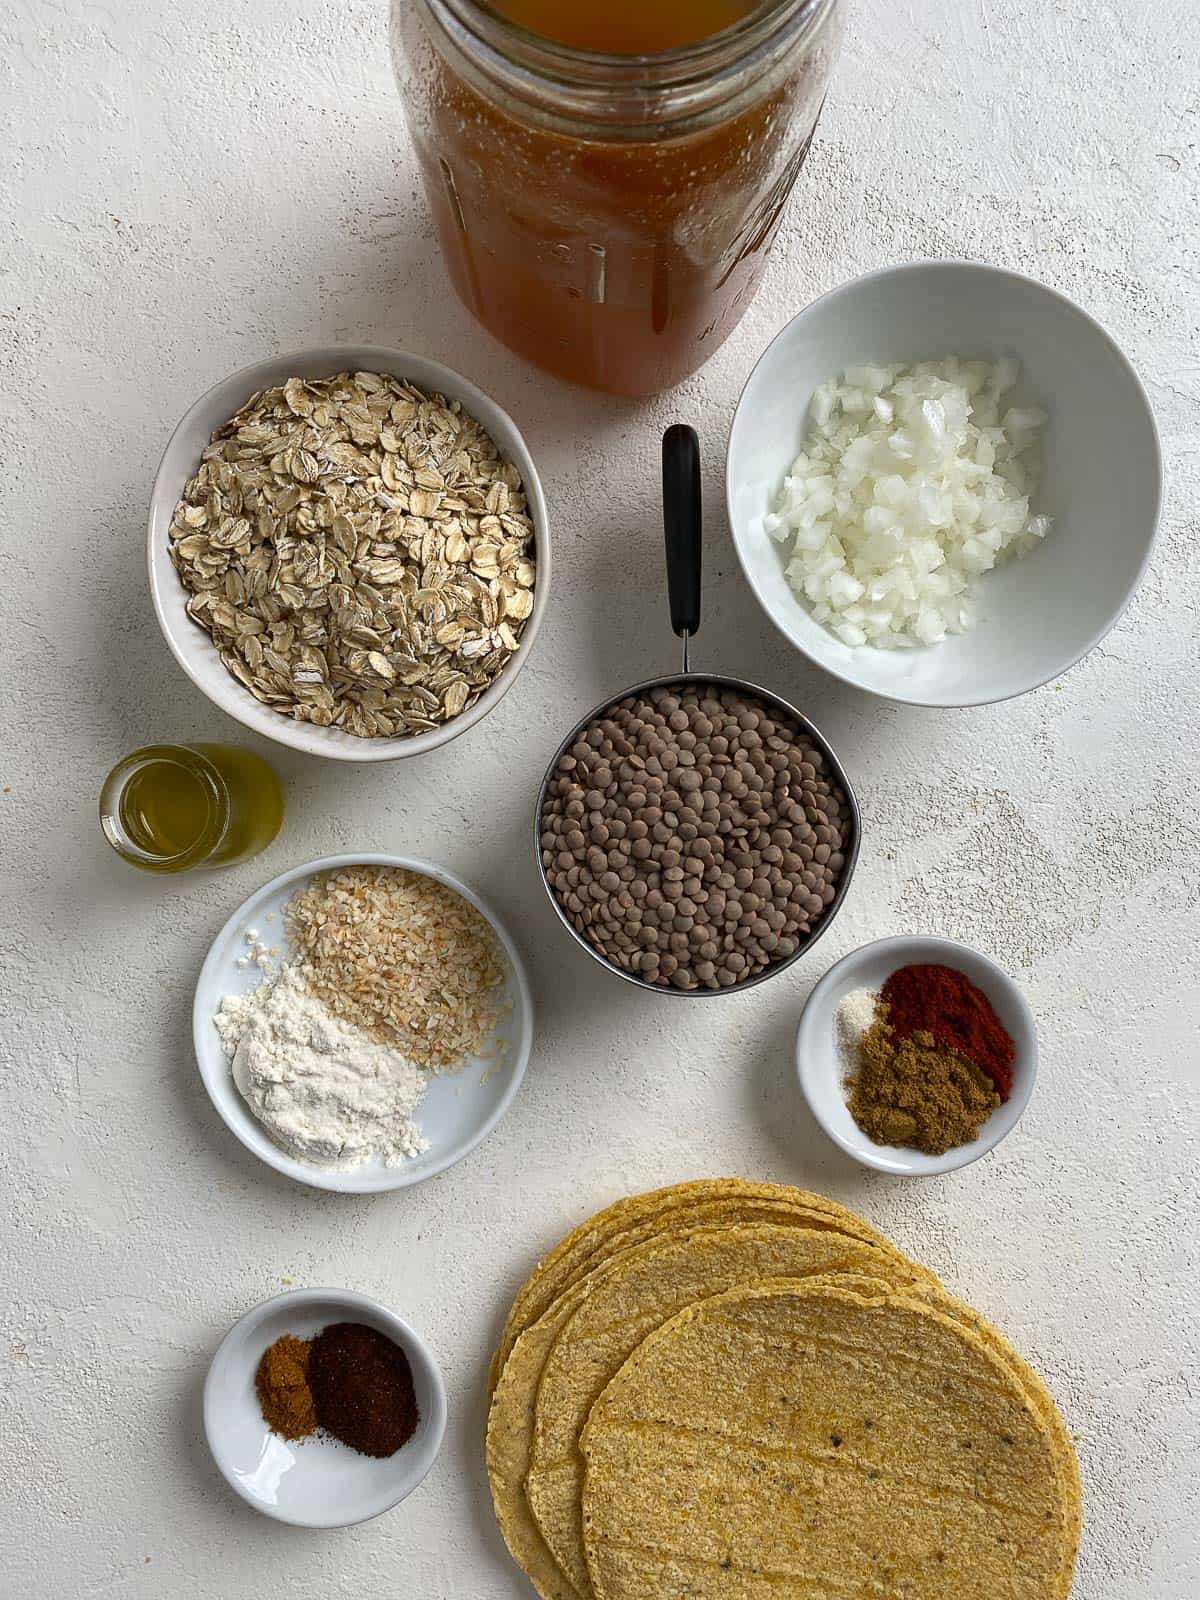 ingredients for Plant Based Street Tacos with Lentils measured out against a white surface